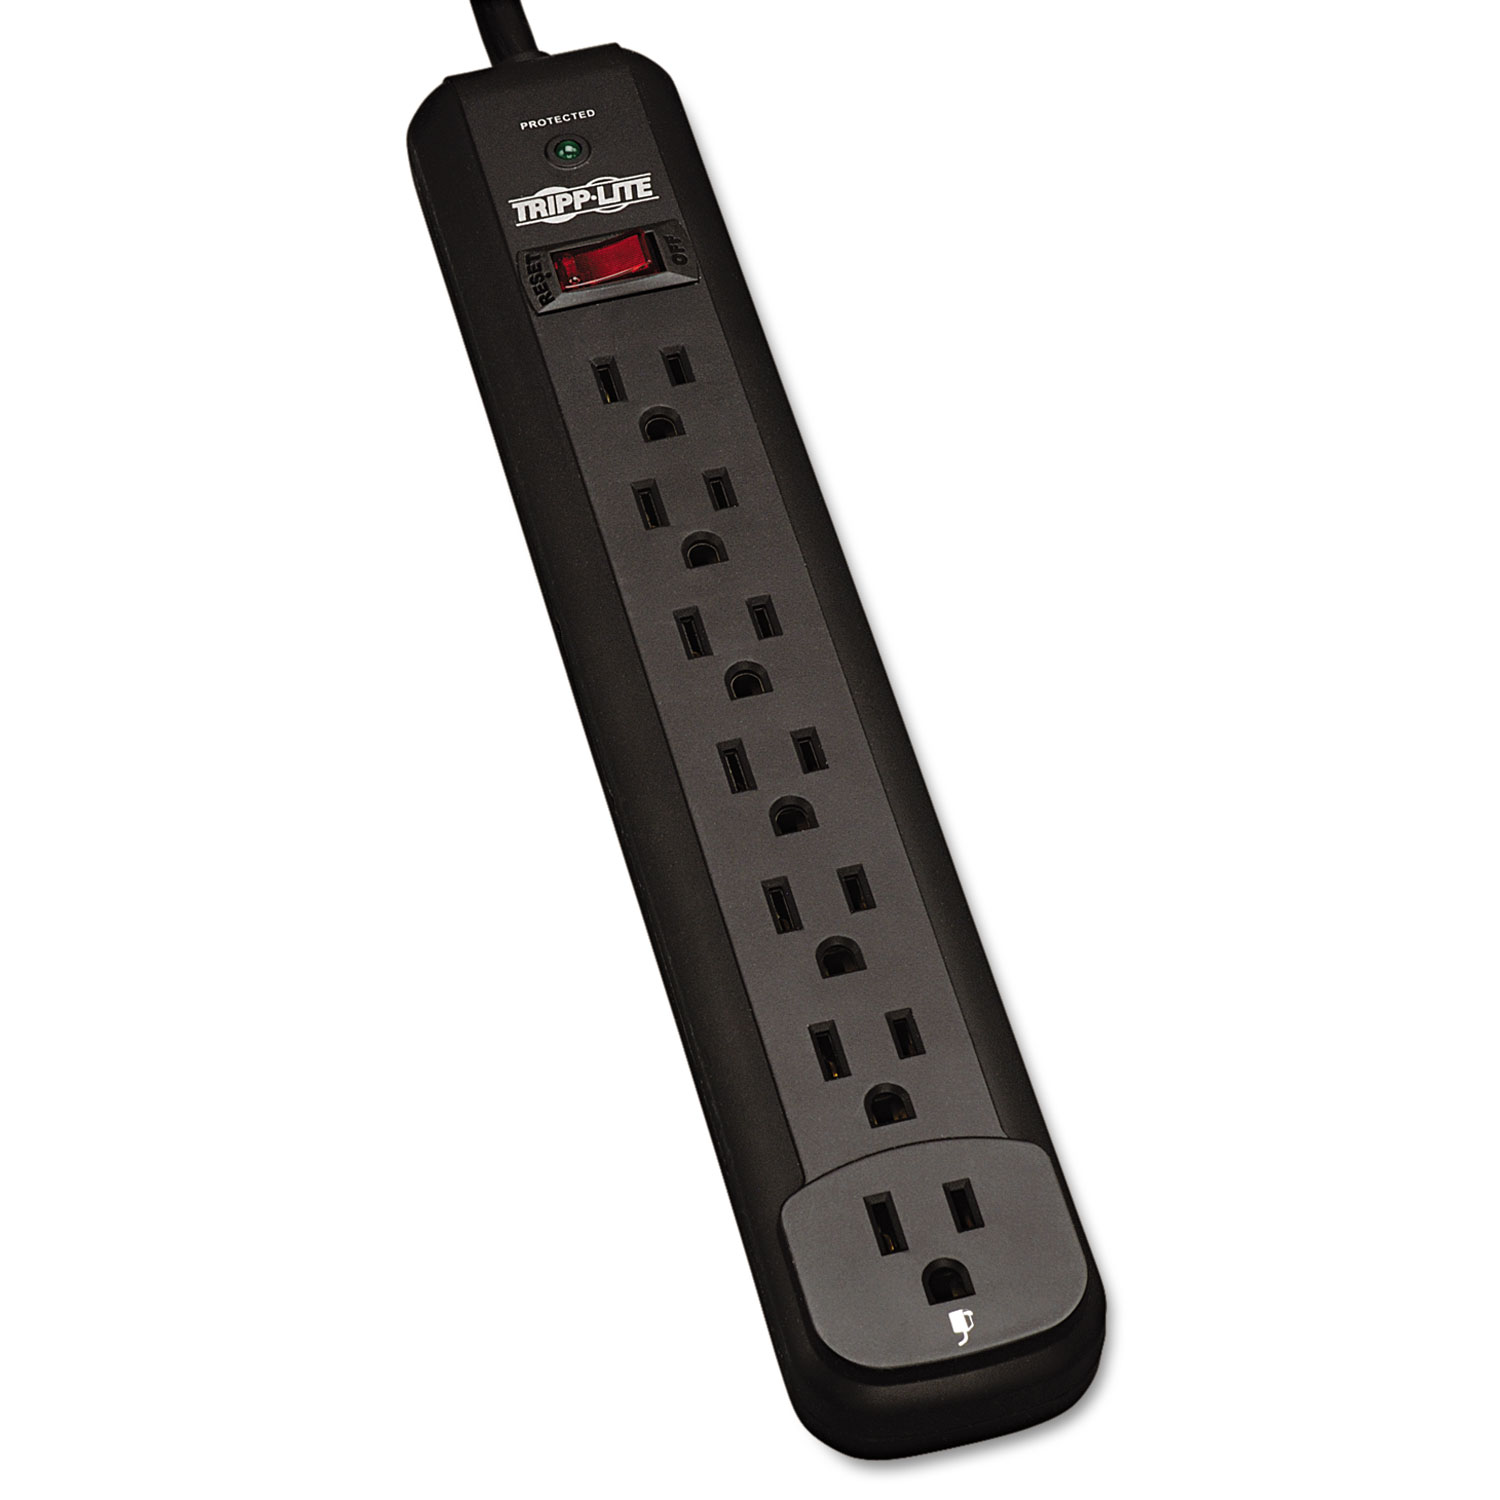  Tripp Lite TLP712B Protect It! Surge Protector, 7 Outlets, 12 ft. Cord, 1080 Joules, Black (TRPTLP712B) 